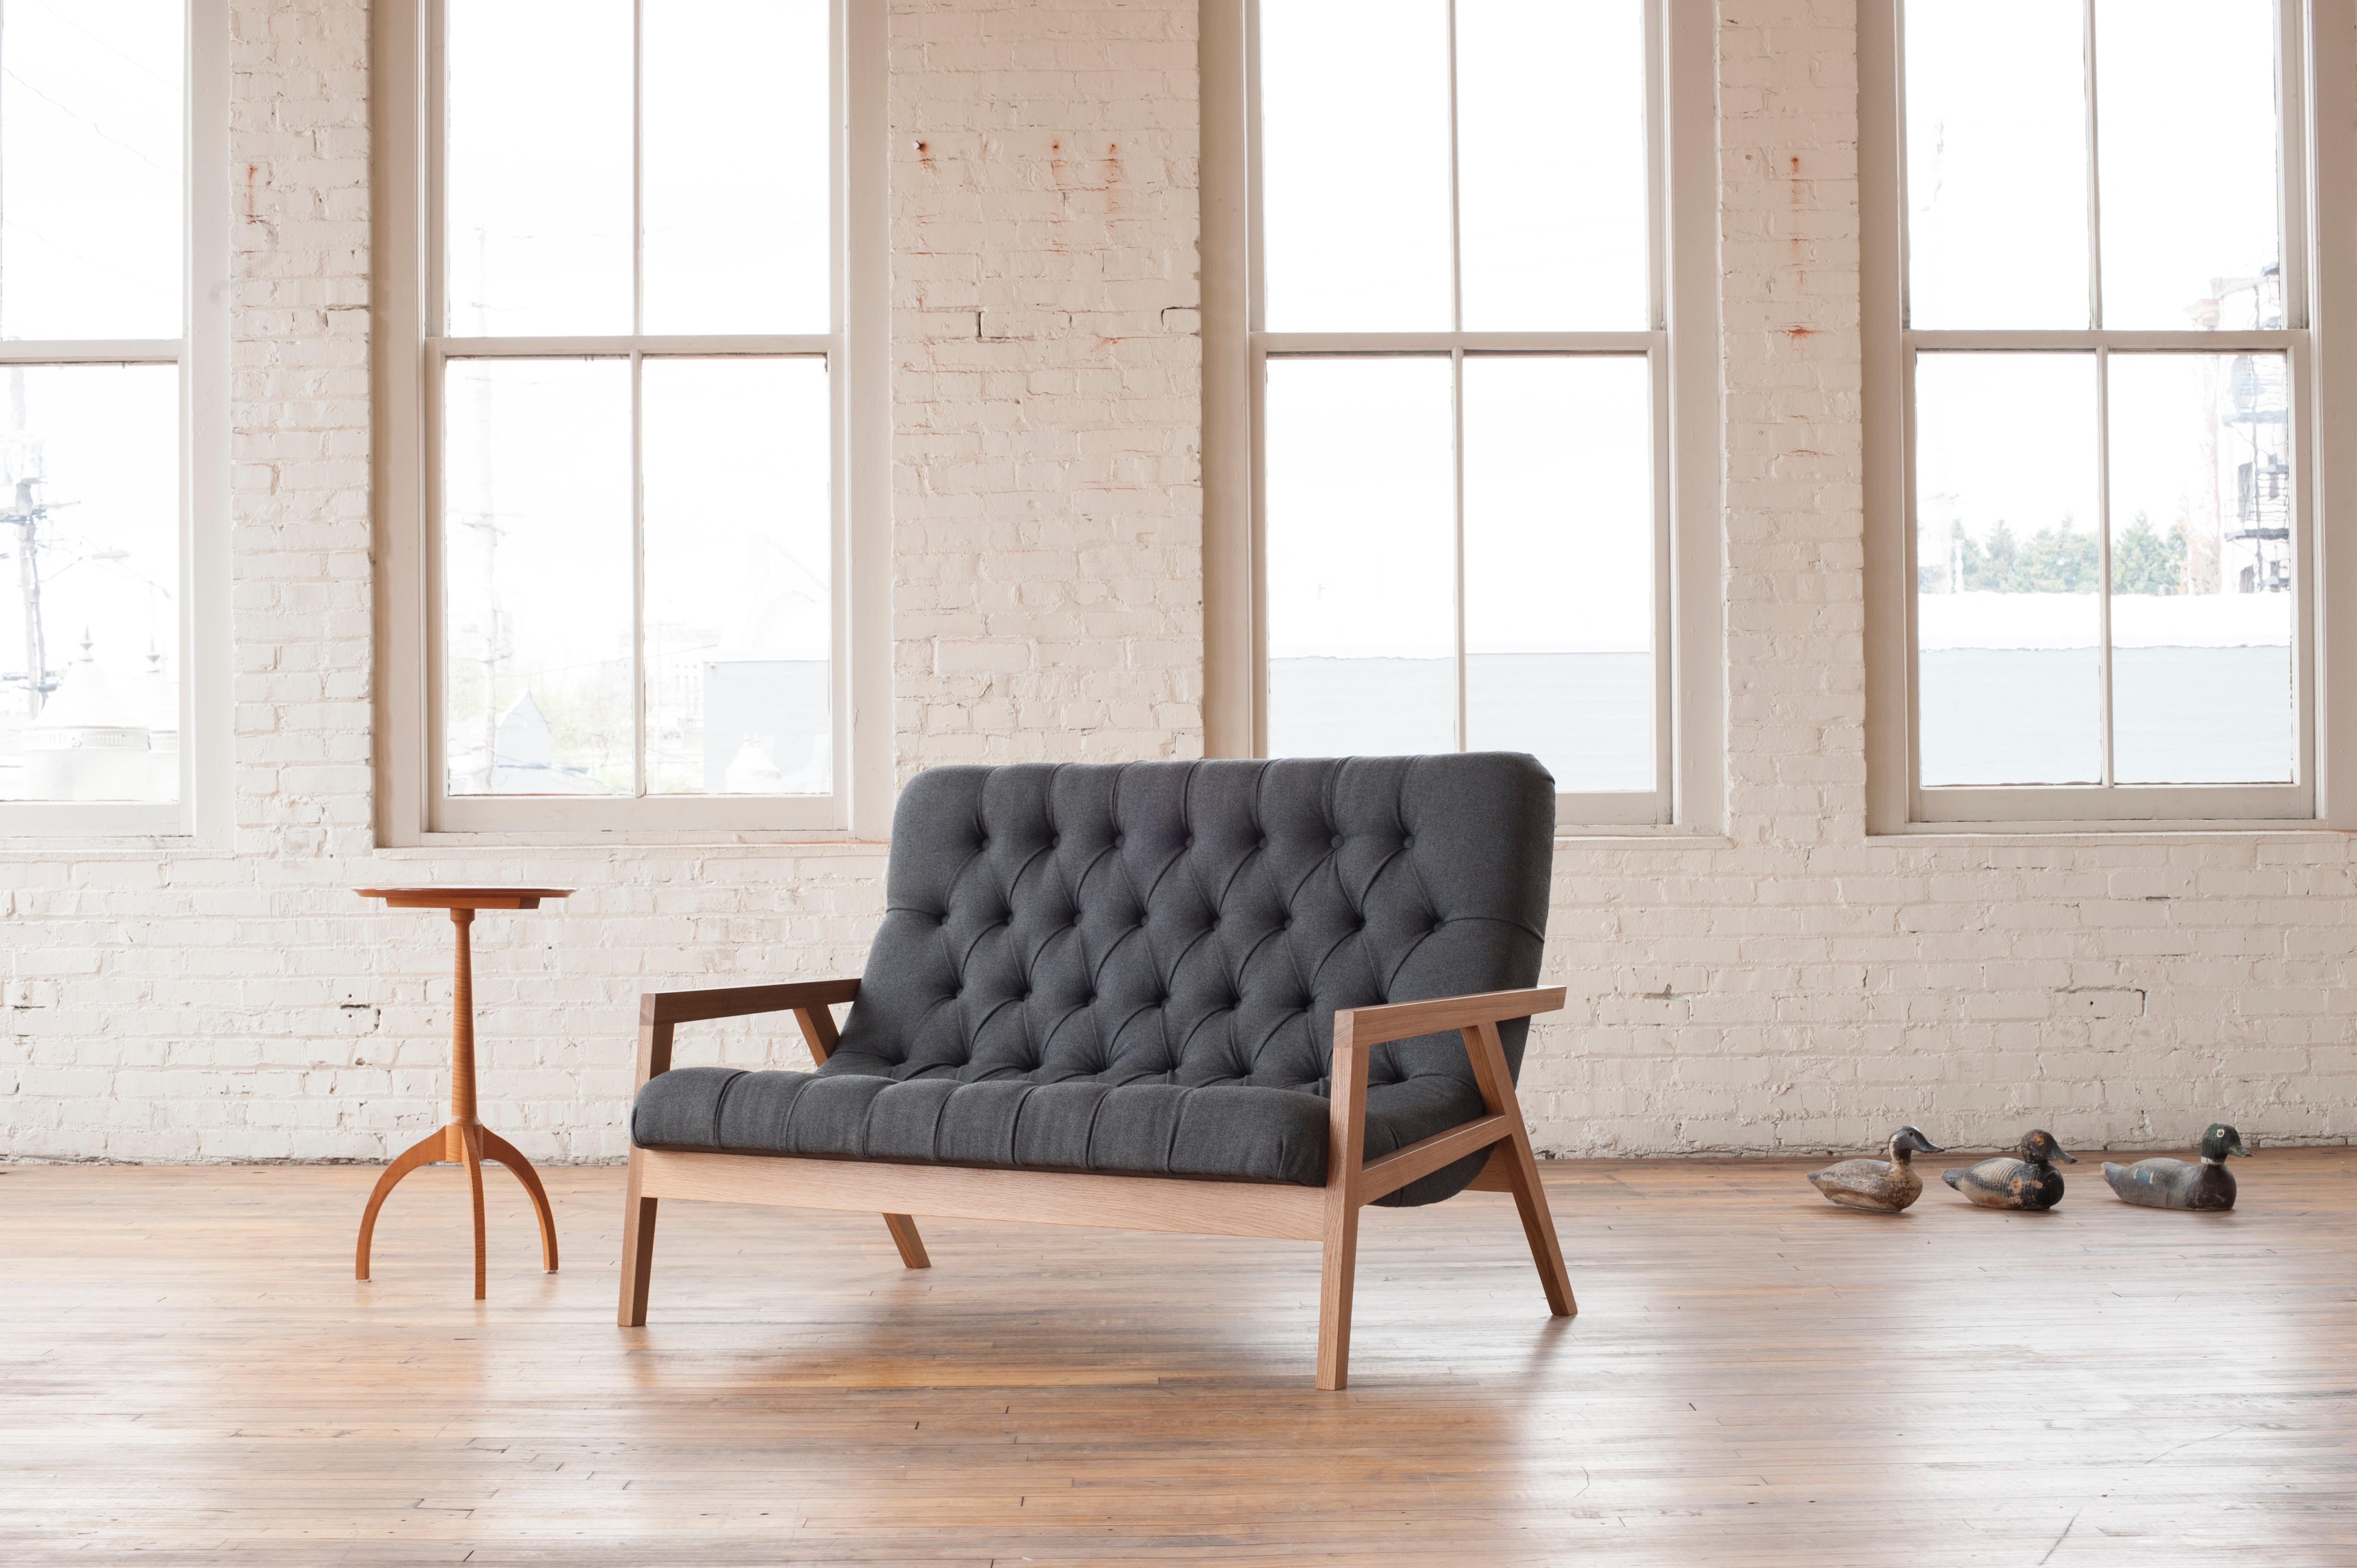 The Regina Loveseat is a handcrafted, modern contemporary loveseat with a solid wood frame that cradles a simple curved laminated plywood shell, hidden under layers of foam and traditional diamond tufted leather or wool. Incredibly comfortable, this